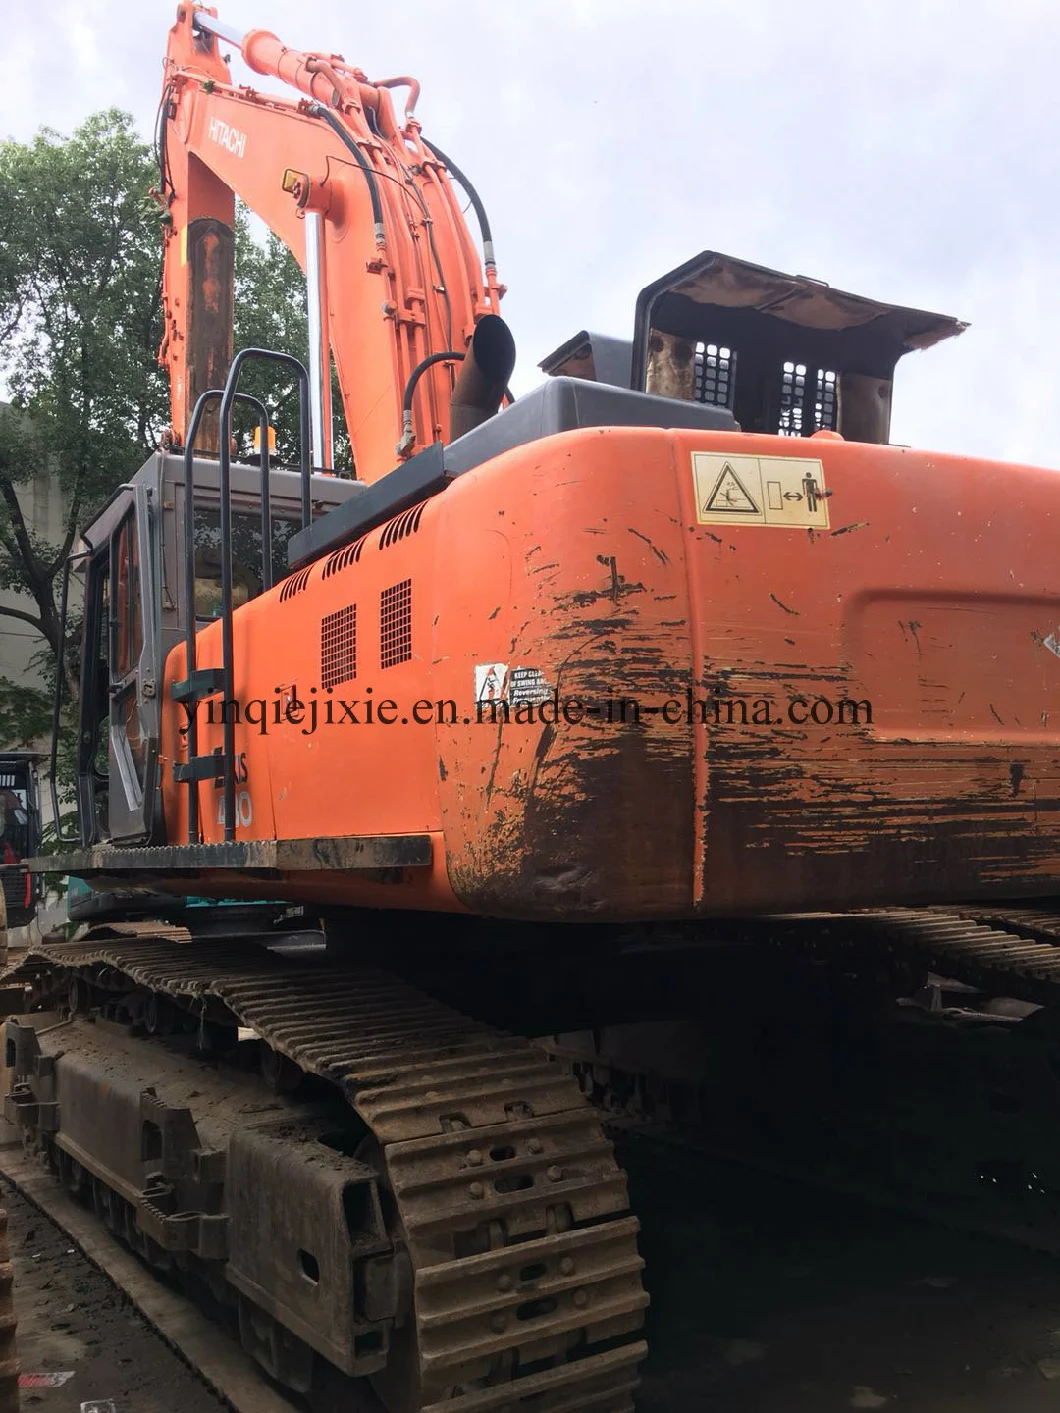 Used Hitachi Zx480 Excavator in Cheap Price, Secondhand High Quality Hitachi Zx480 Excavator